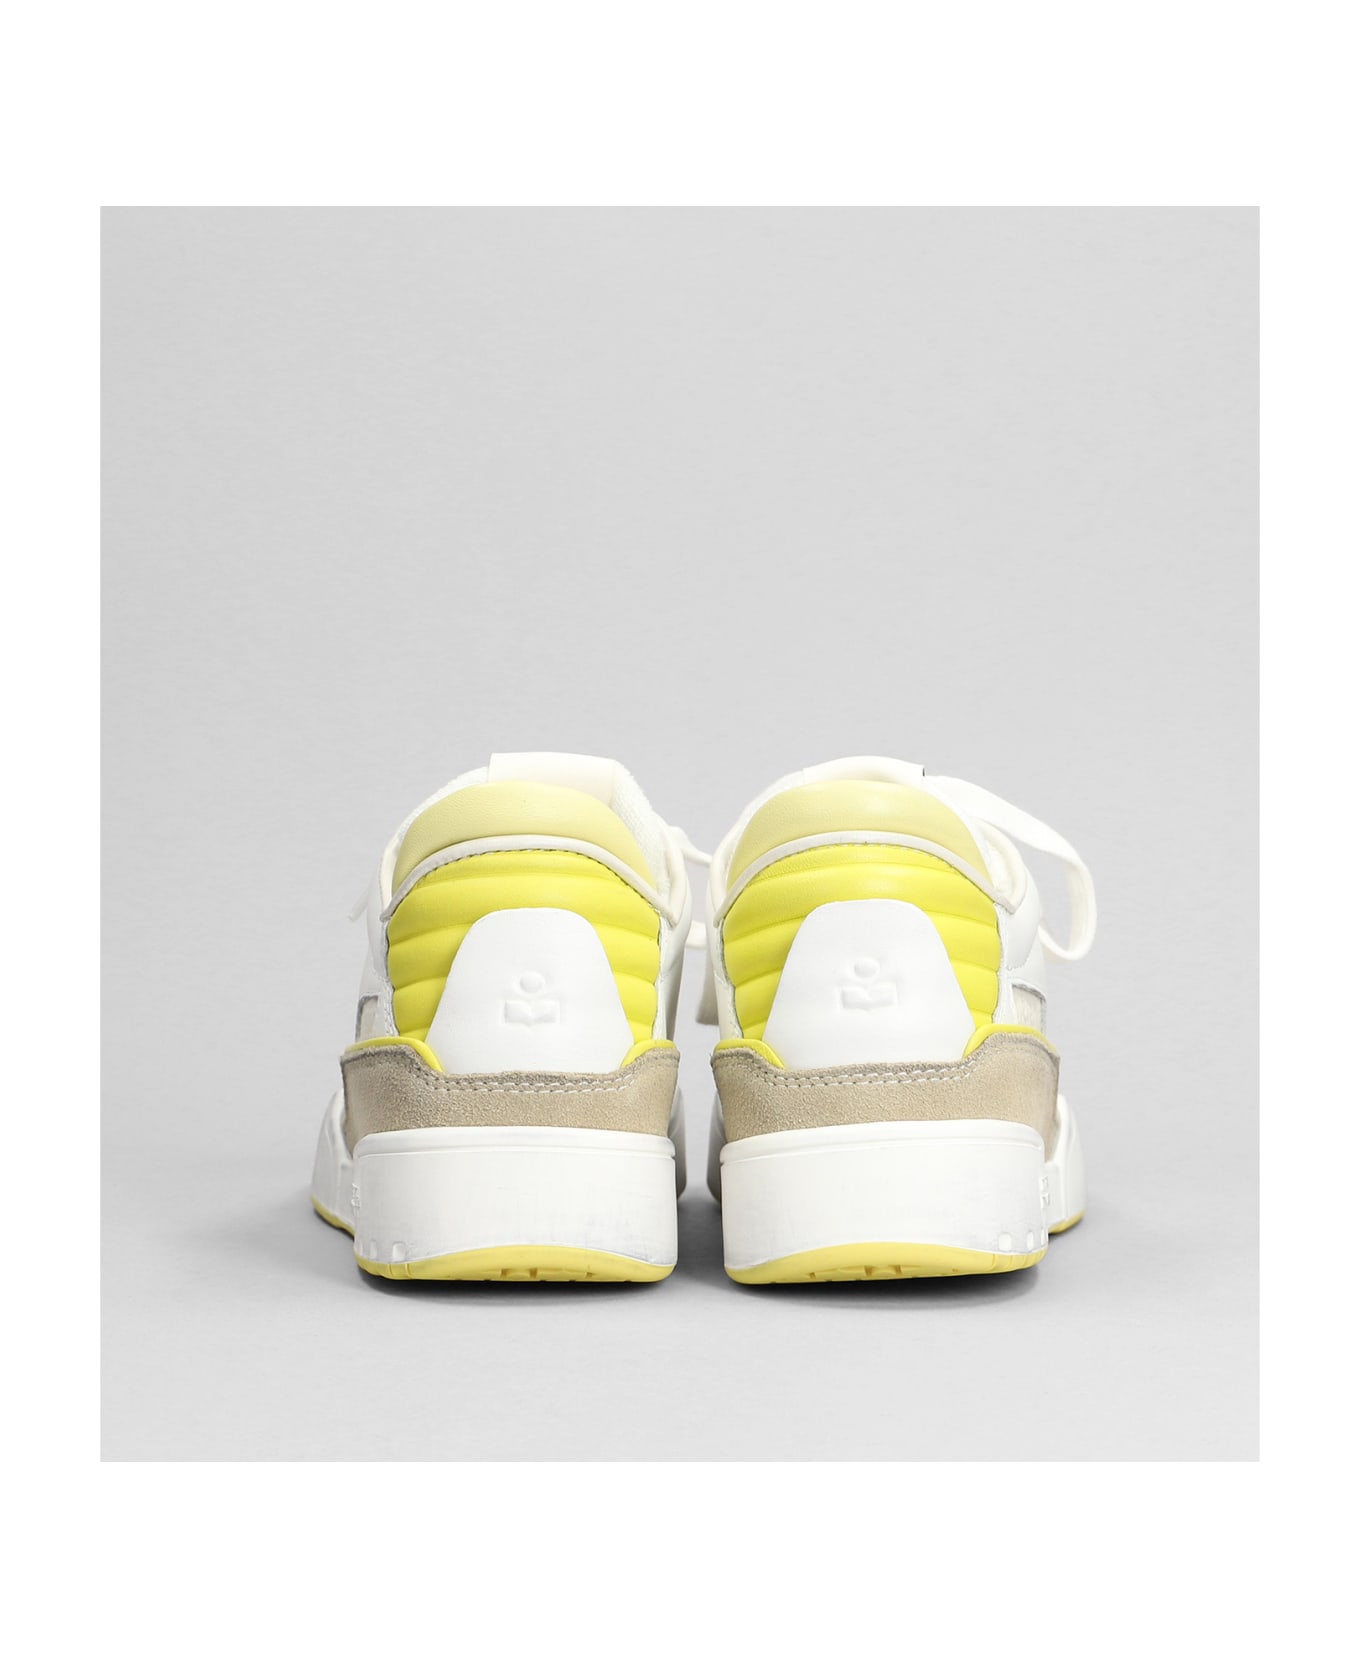 Isabel Marant Emree Sneakers In White Suede And Leather - Liye Light Yellow スニーカー